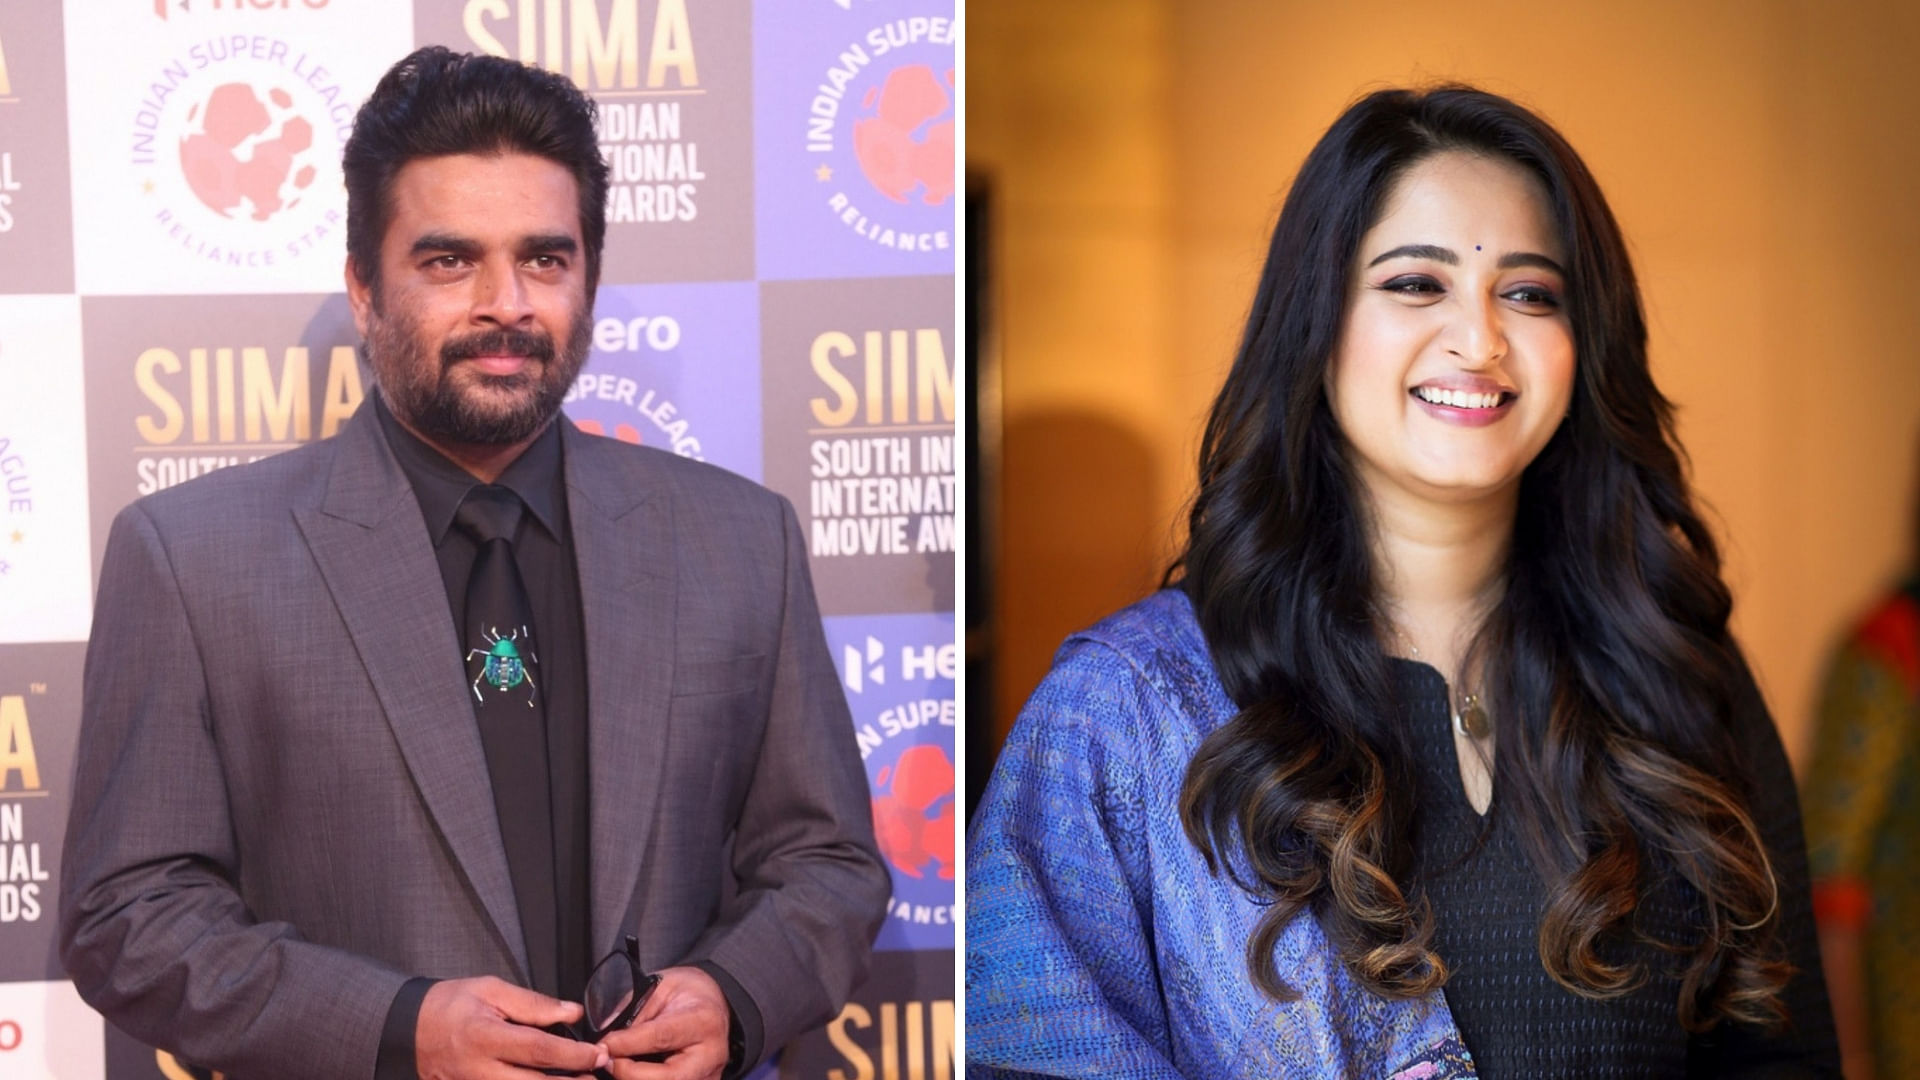 R Madhavan and Anushka Shetty have been signed on for a film together.